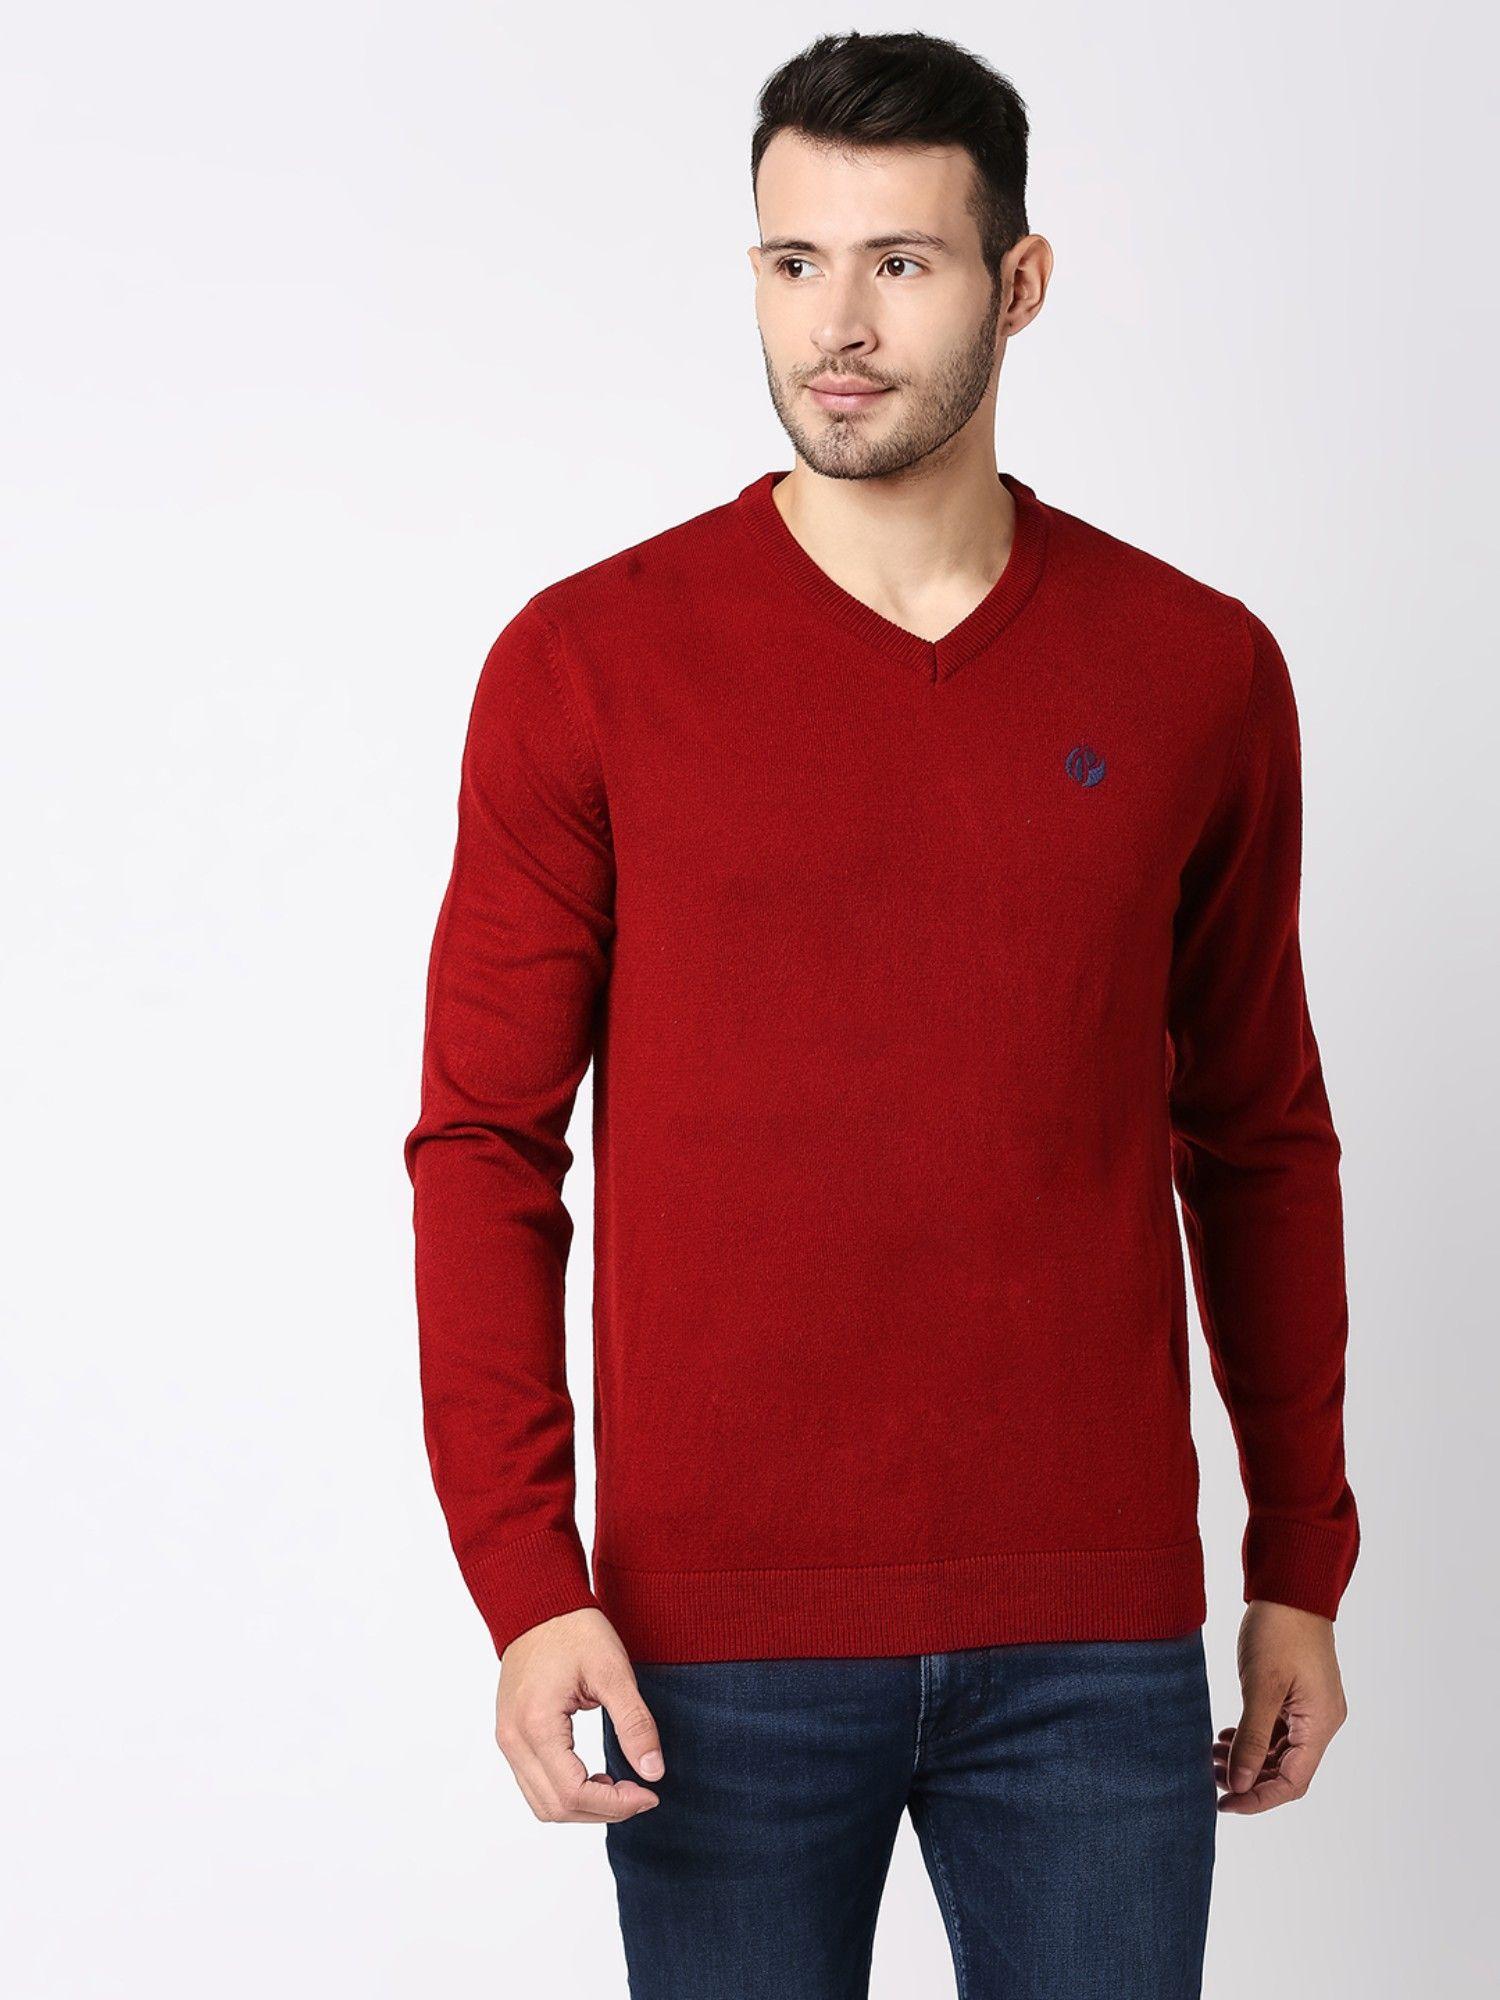 supremo light acro wool red sweater